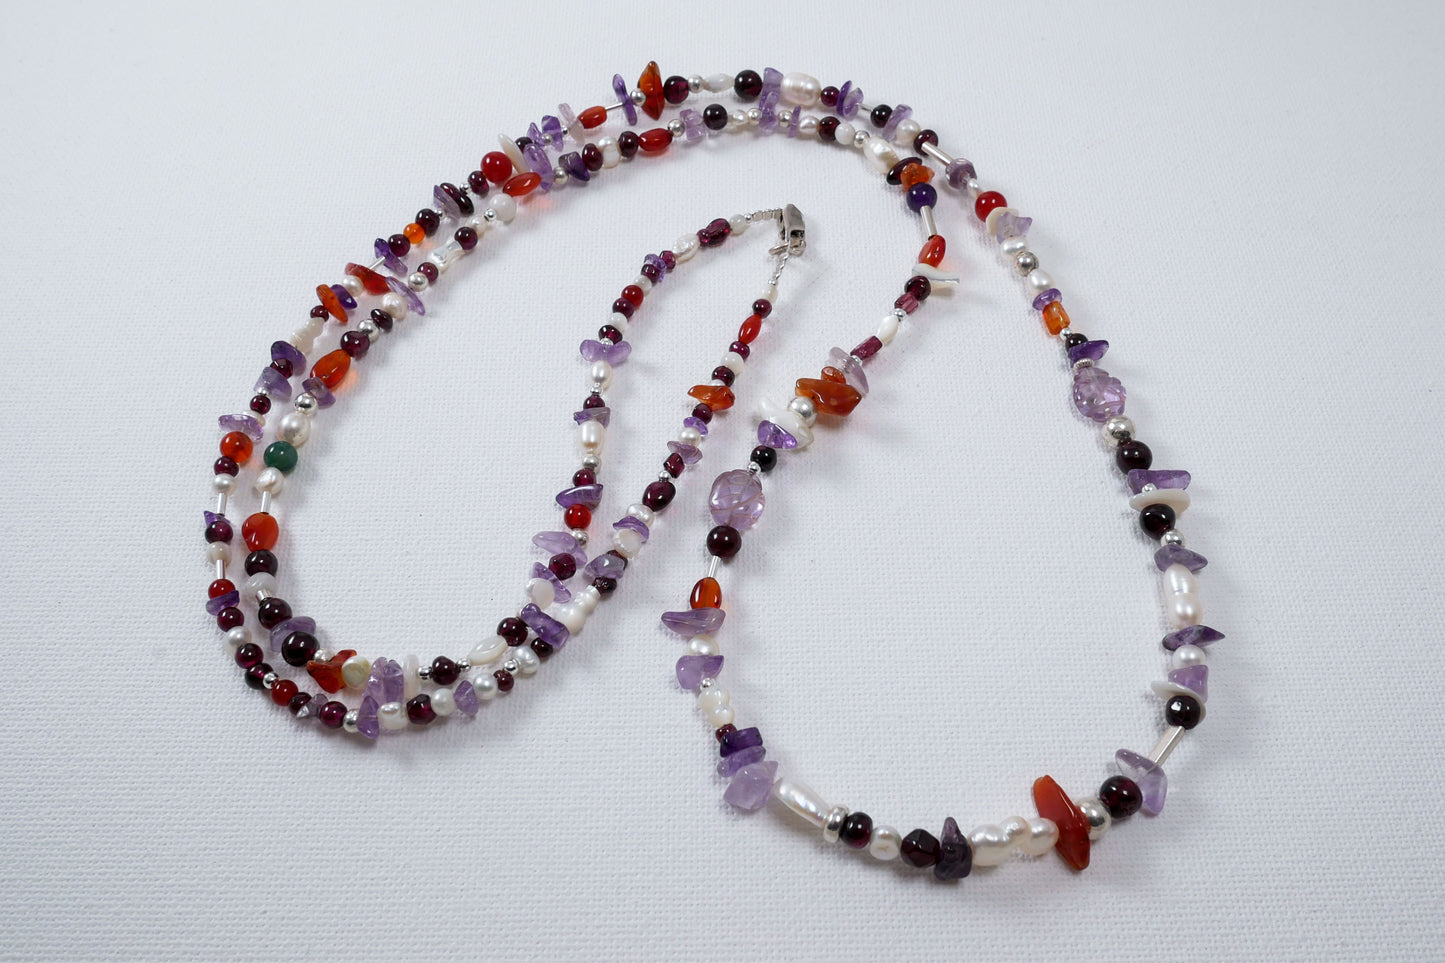 Handmade necklace with multi color gemstones and sterling silver